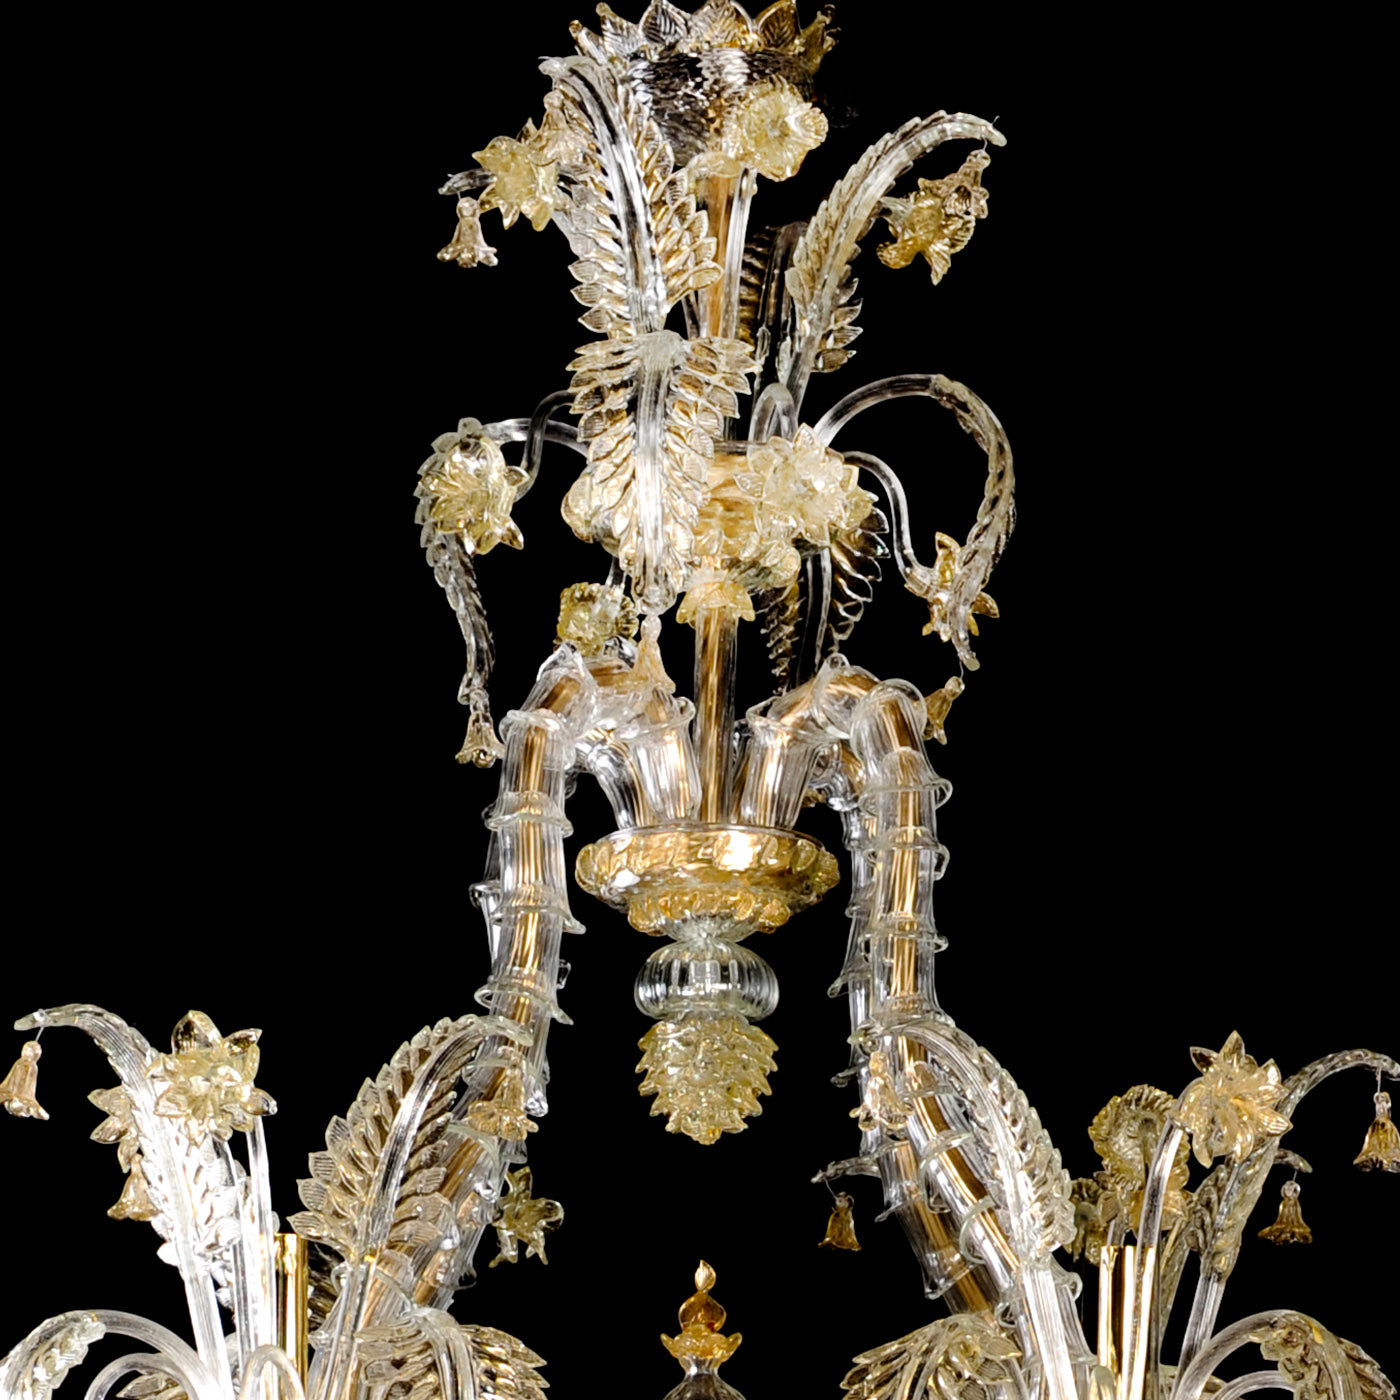 Rezzonico-style Gold and Crystal Chandelier #7 - Alternative view 5